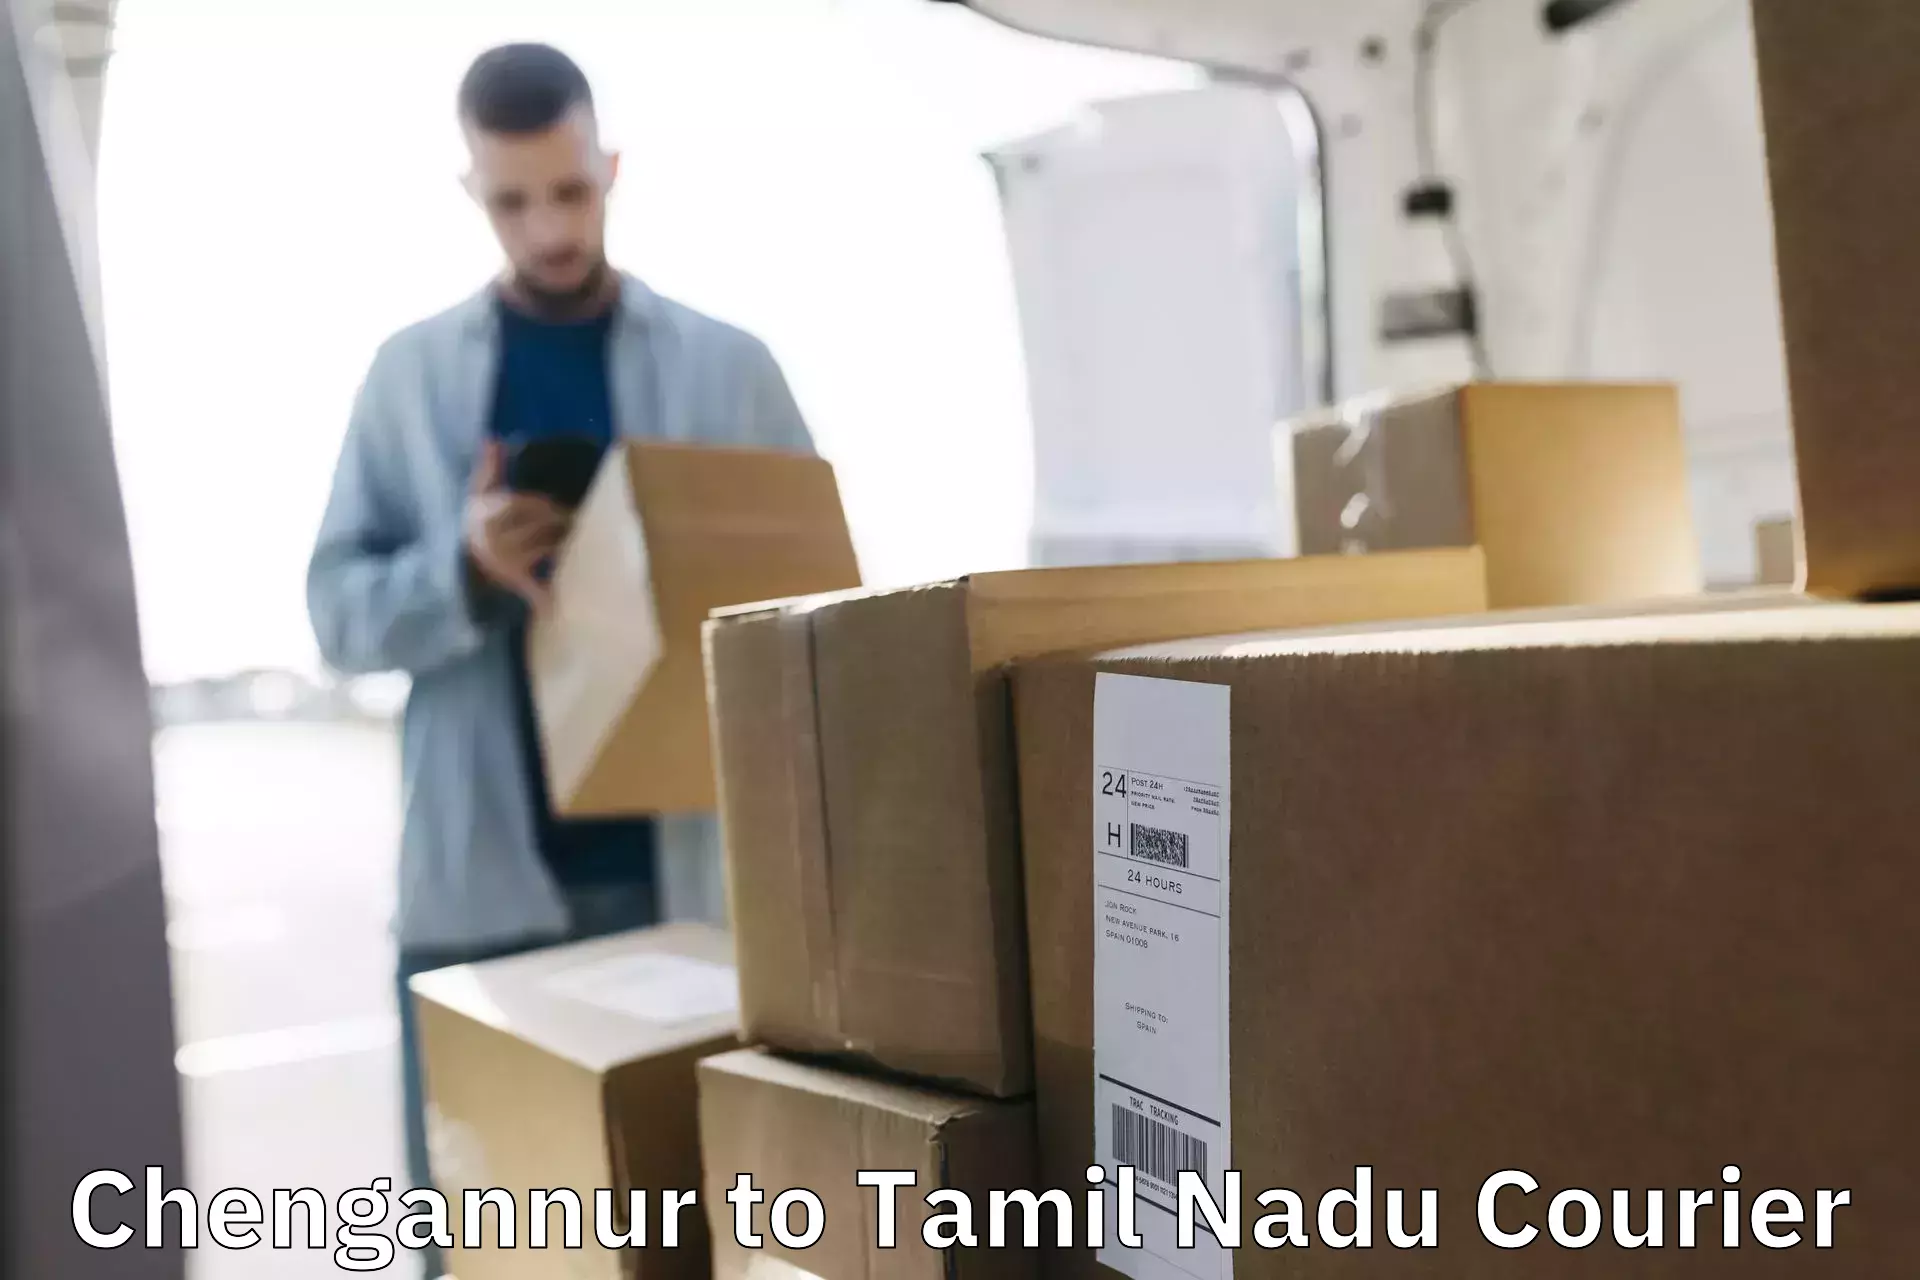 Quality courier services Chengannur to Palayankottai